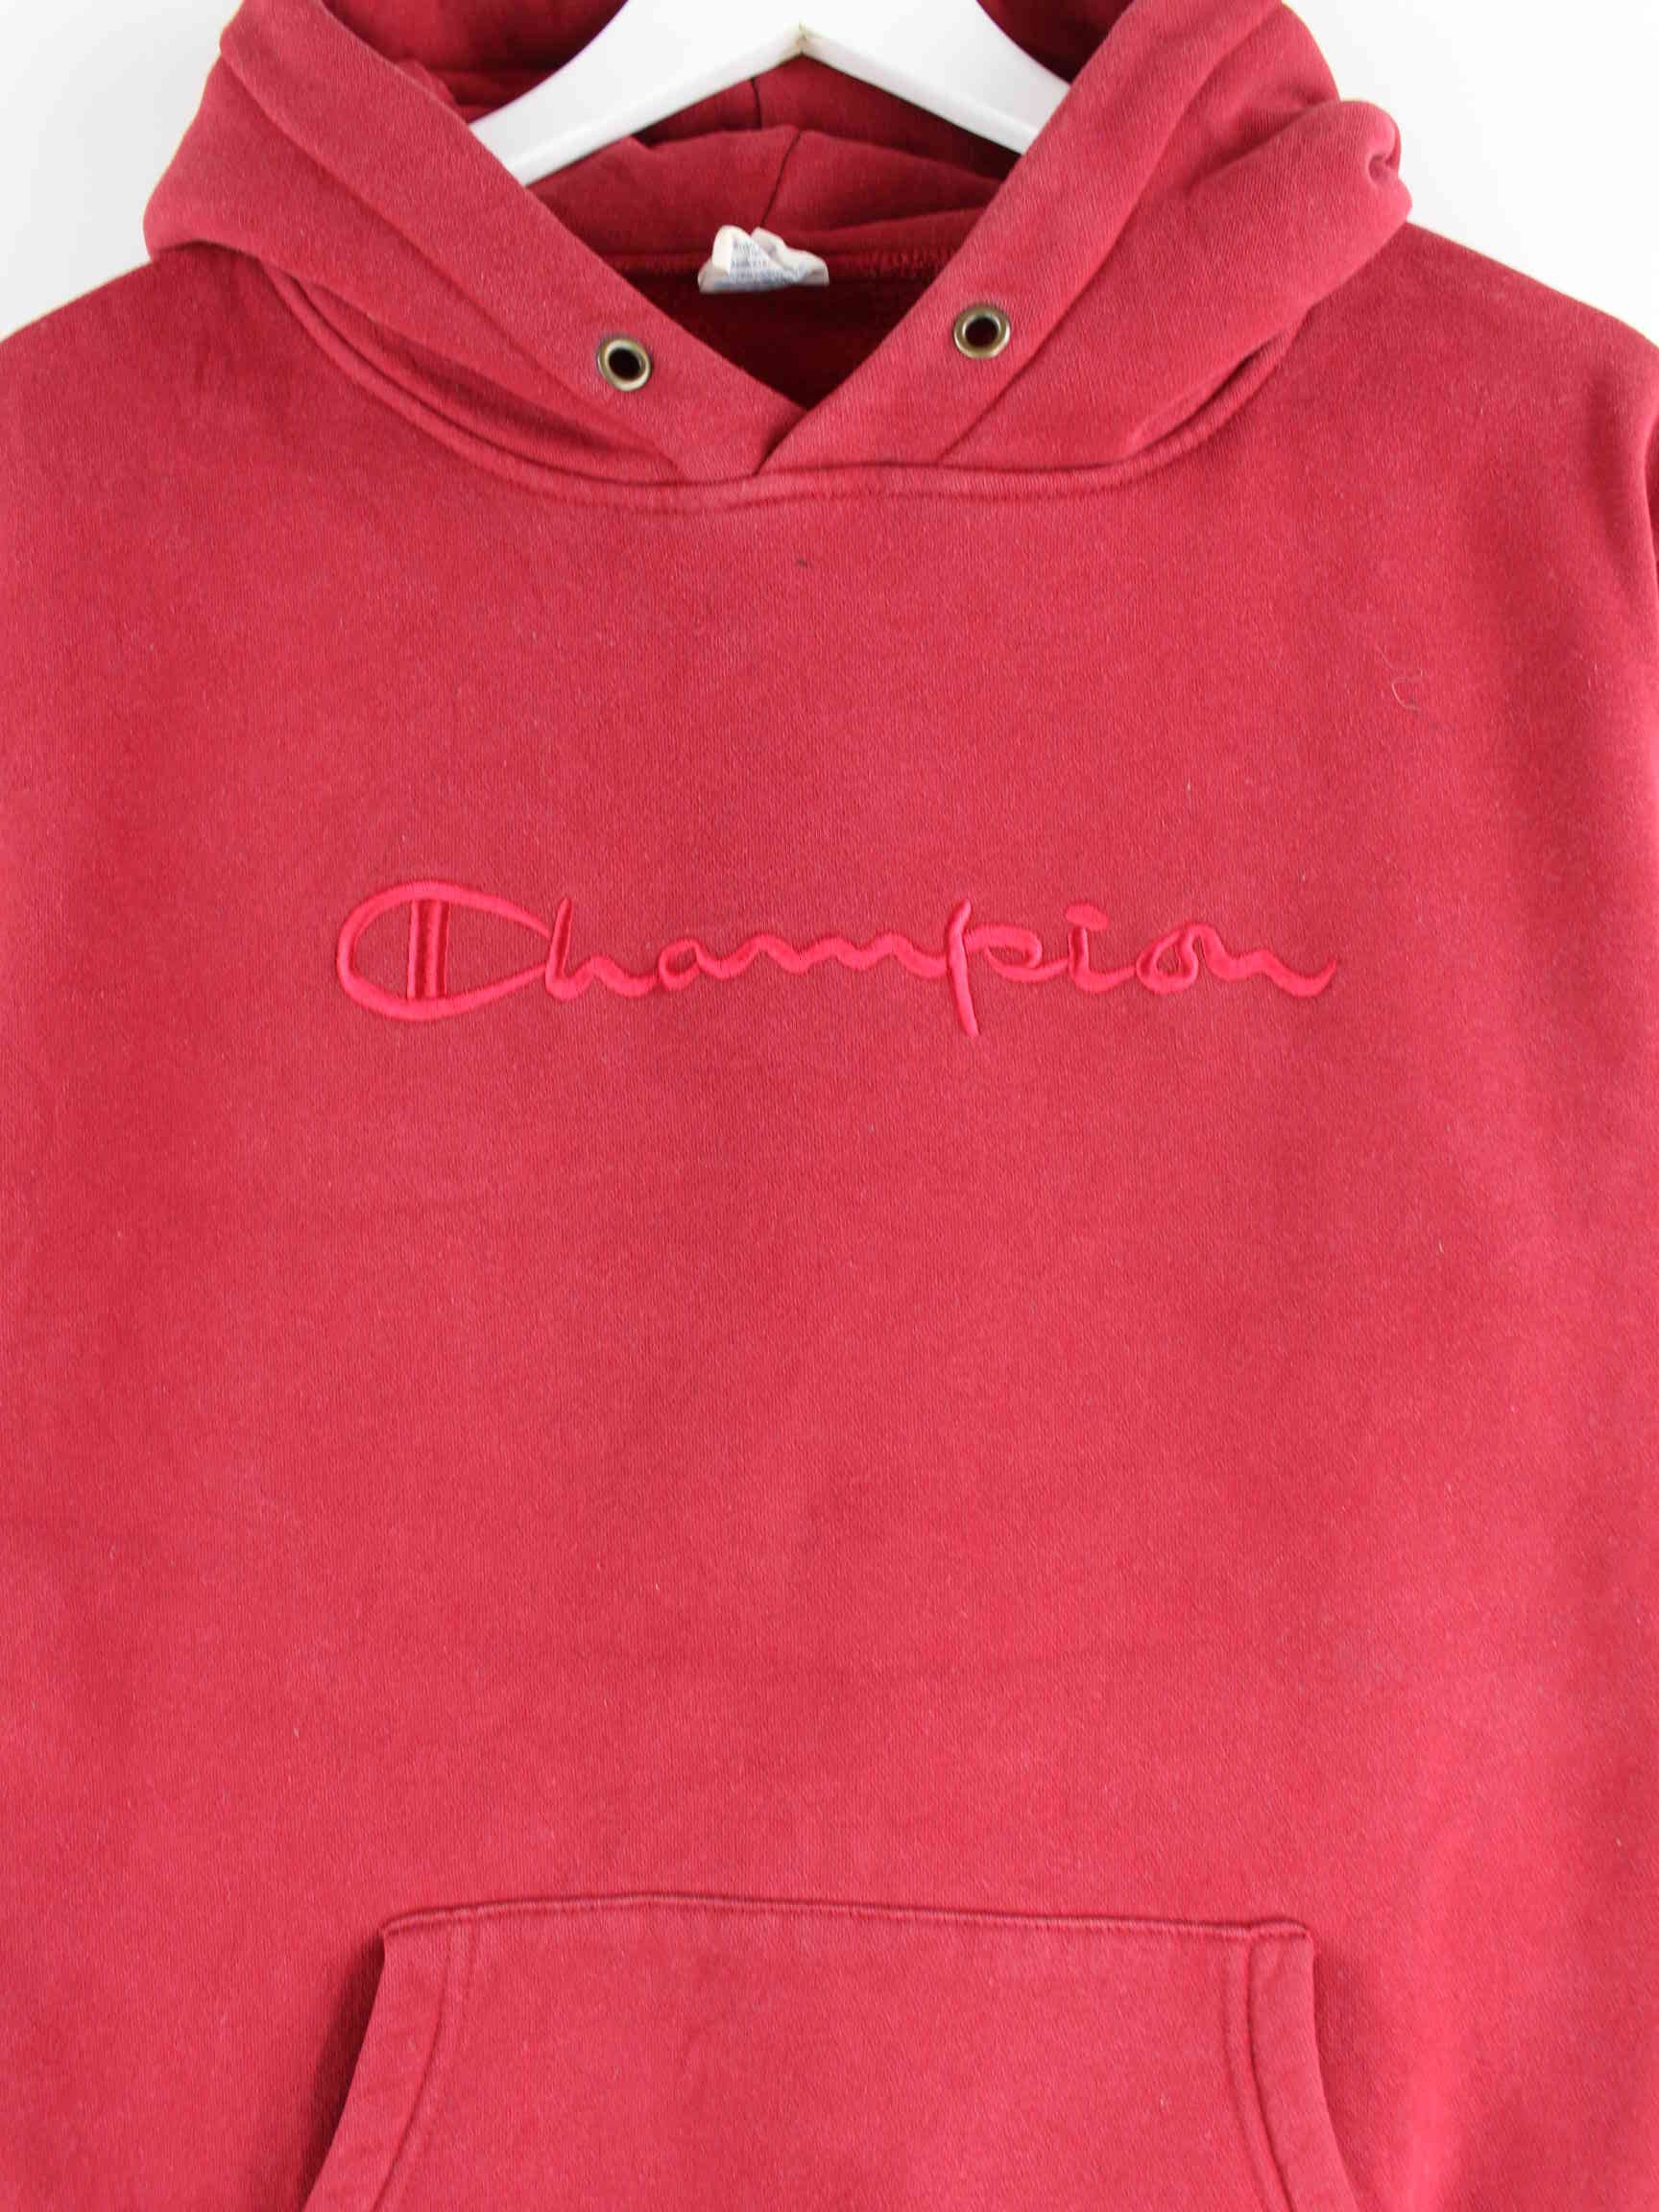 Champion y2k Embroidered Hoodie Rot S (detail image 1)